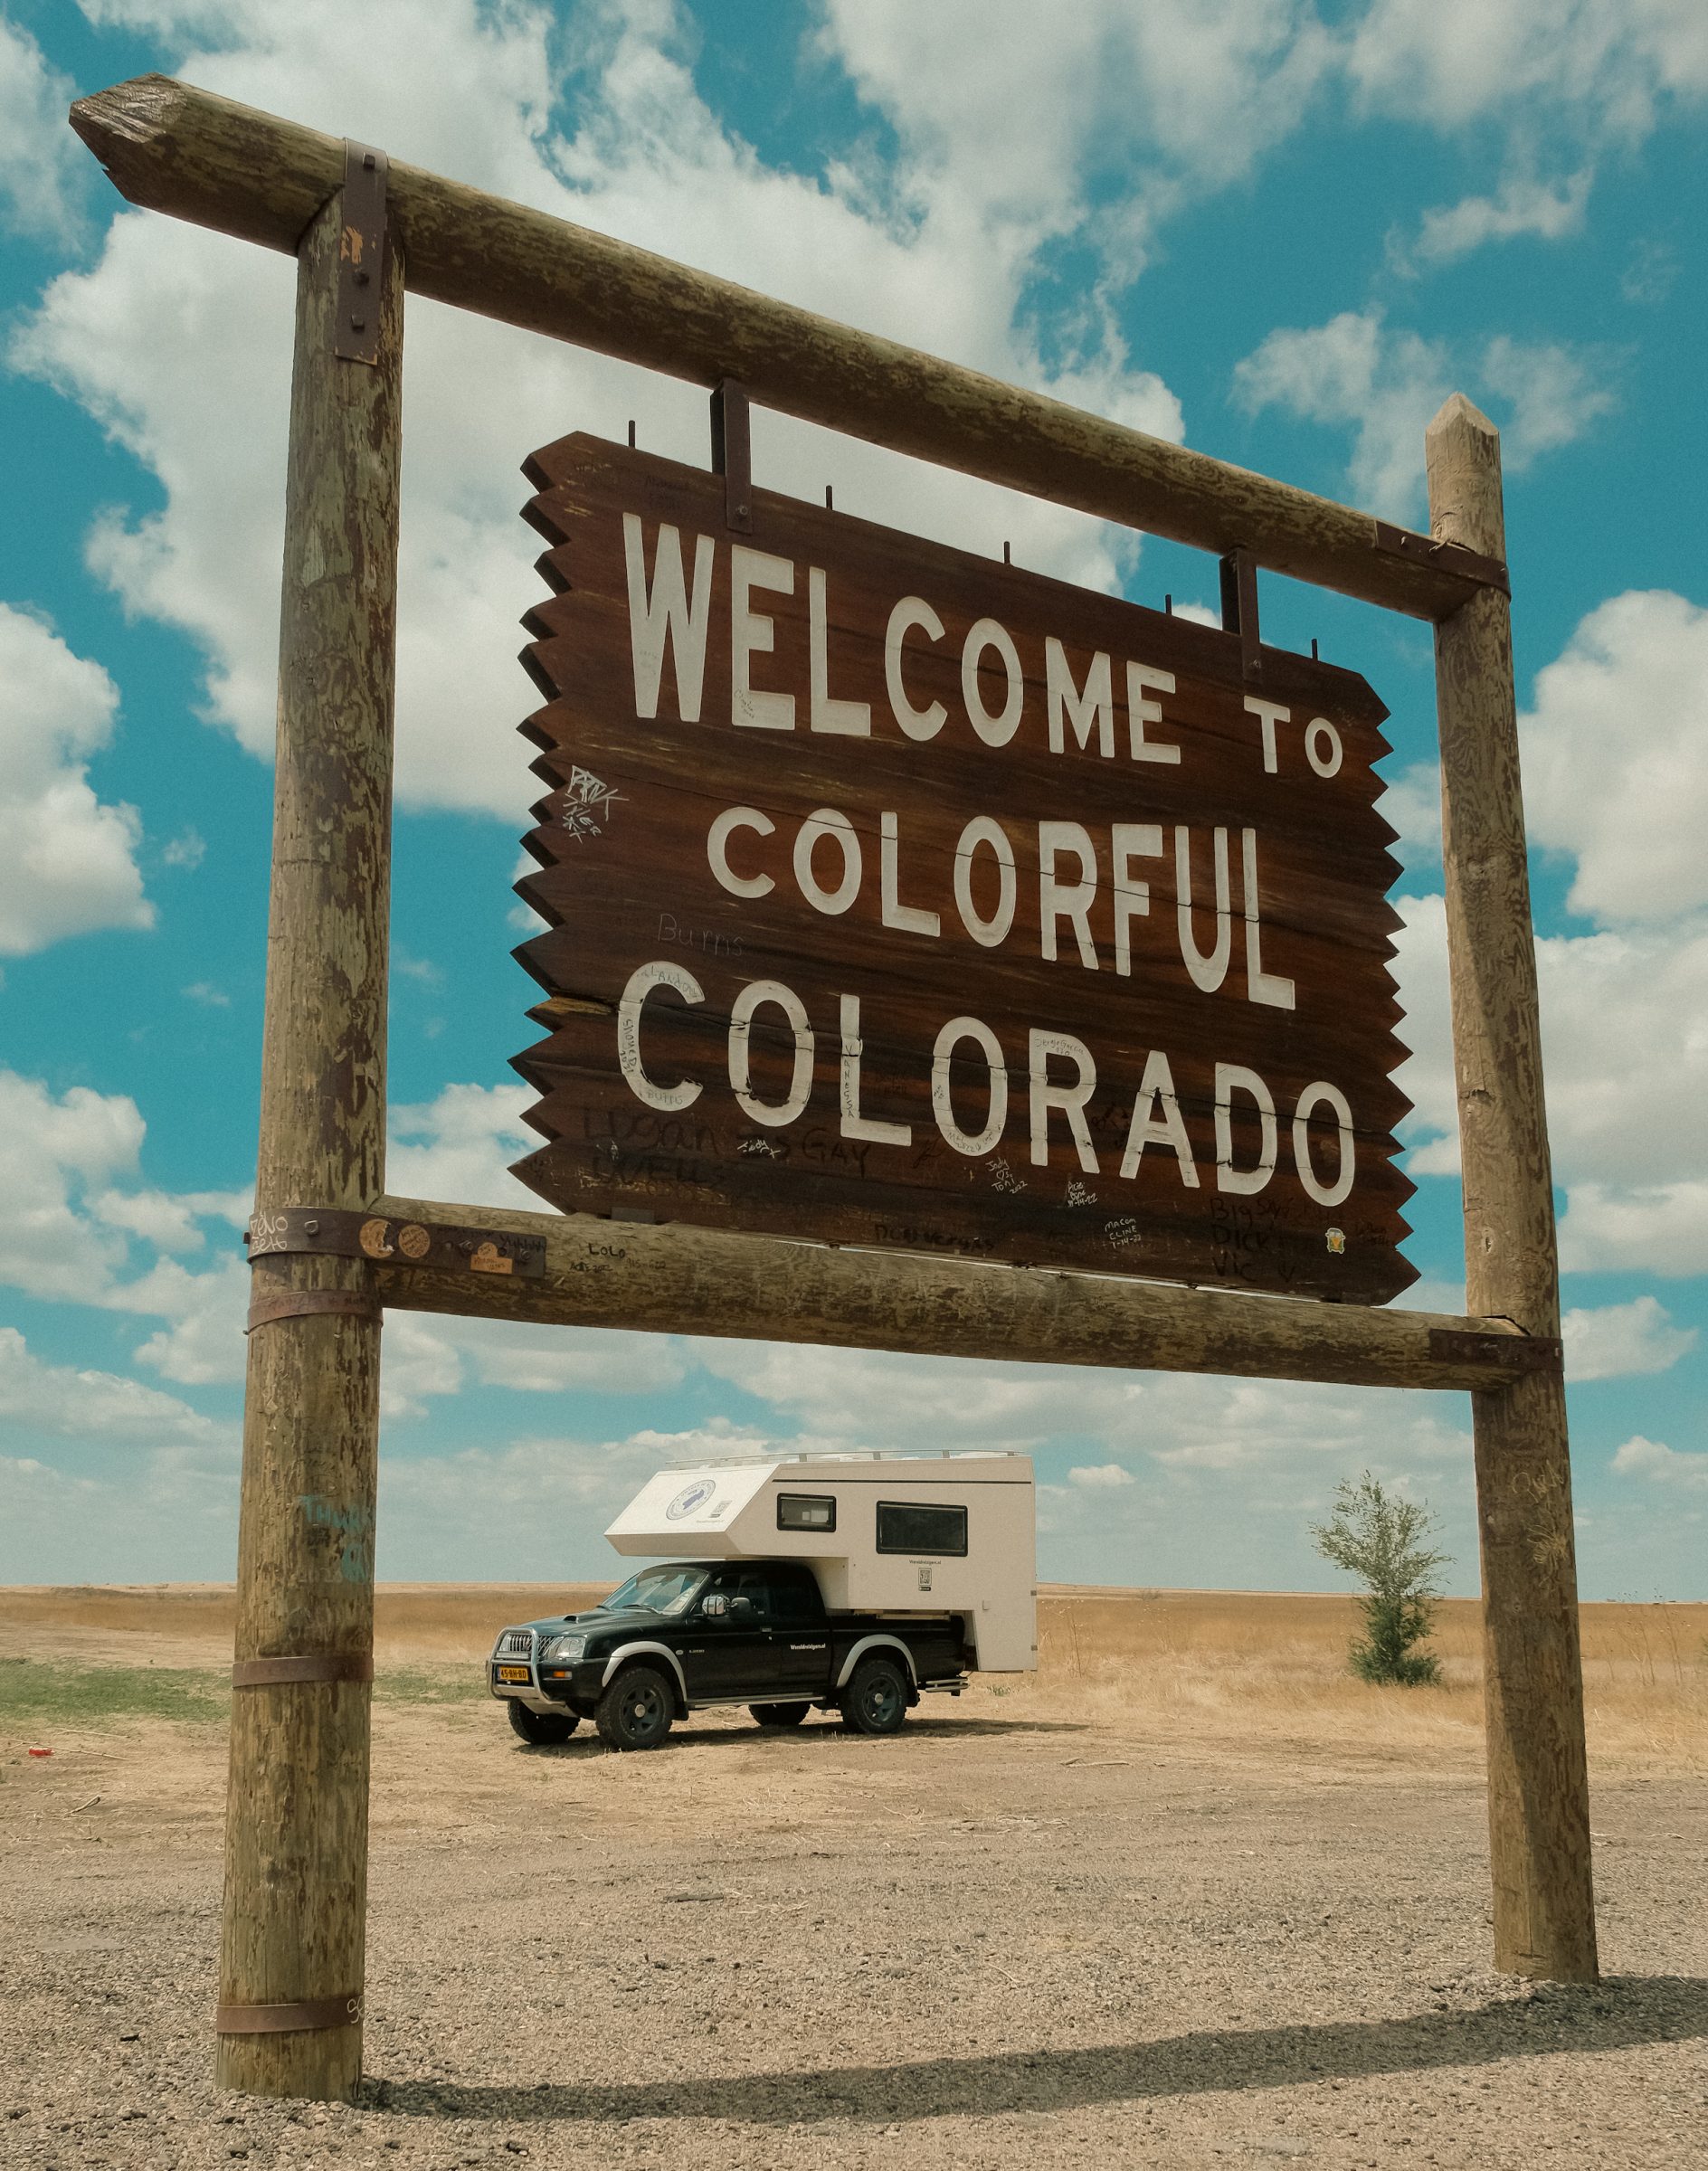 Welcome to colorful Colorado!